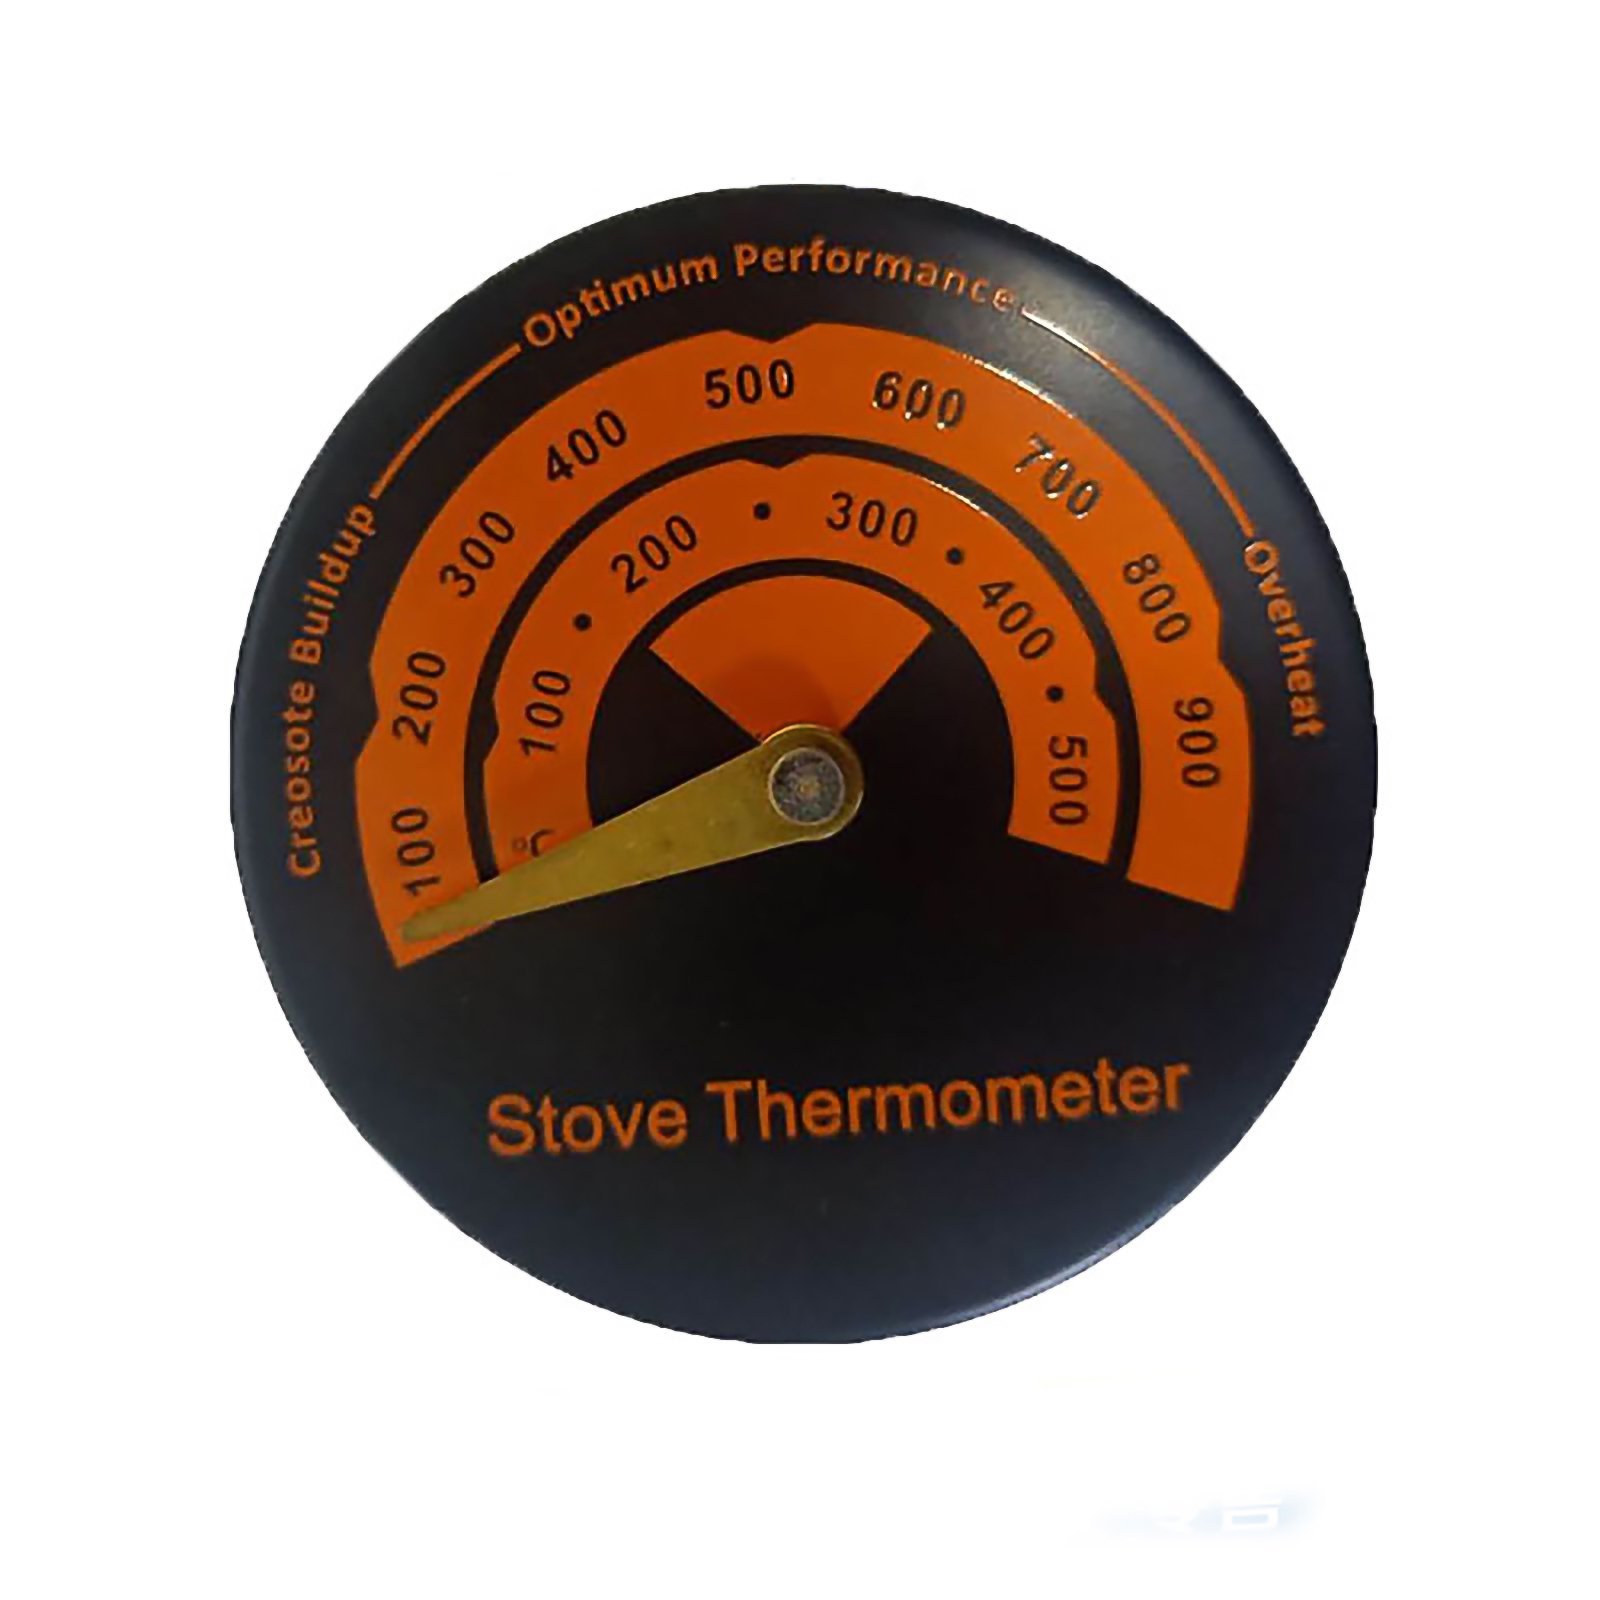 https://themarketdepot.com/wp-content/uploads/2023/01/Powstro-Magnetic-Stove-Thermometer-Oven-Temperature-Meter-for-Wood-Burning-Stoves-Gas-Stoves-Pellet-Stove-Stoves-1.jpeg